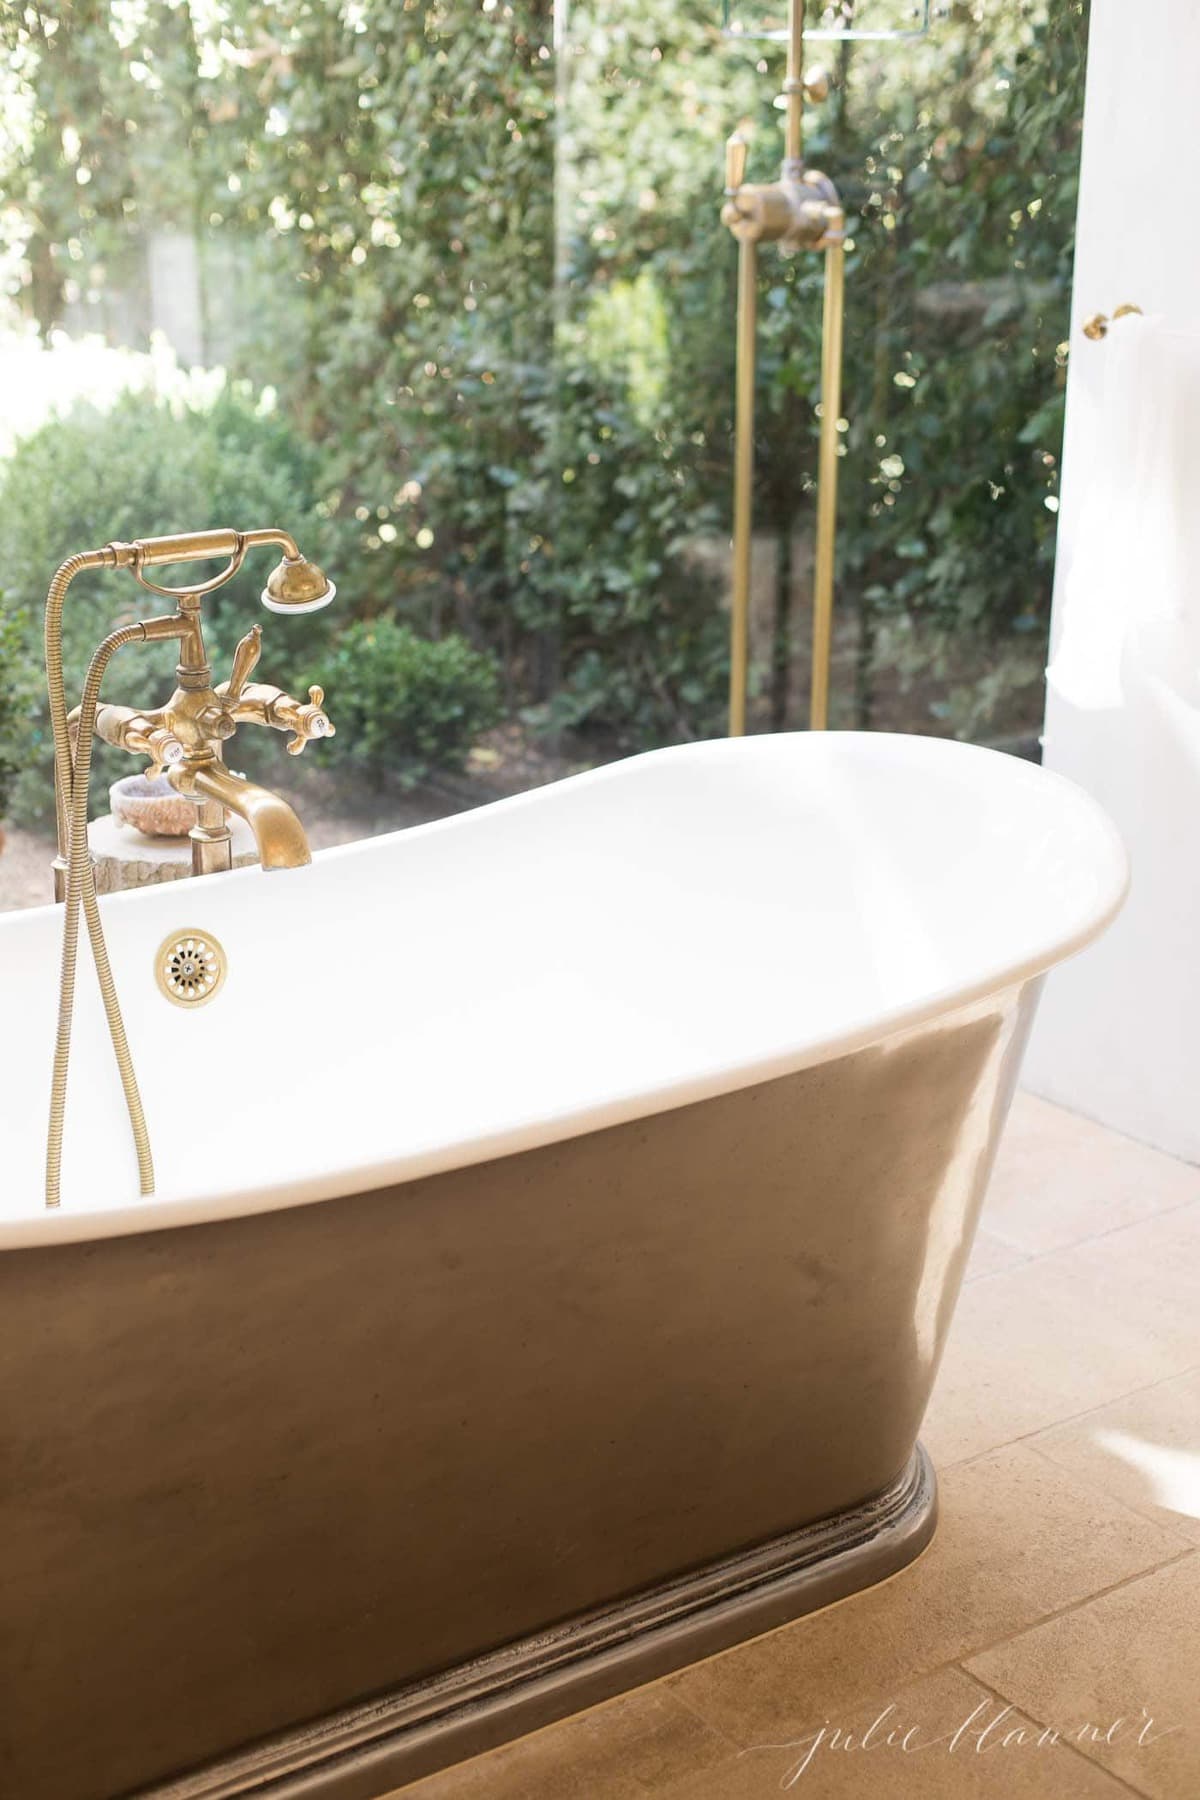 A glass enclosed shower with a brass shower head and bathtub faucet, feels as though its in the garden beyond.